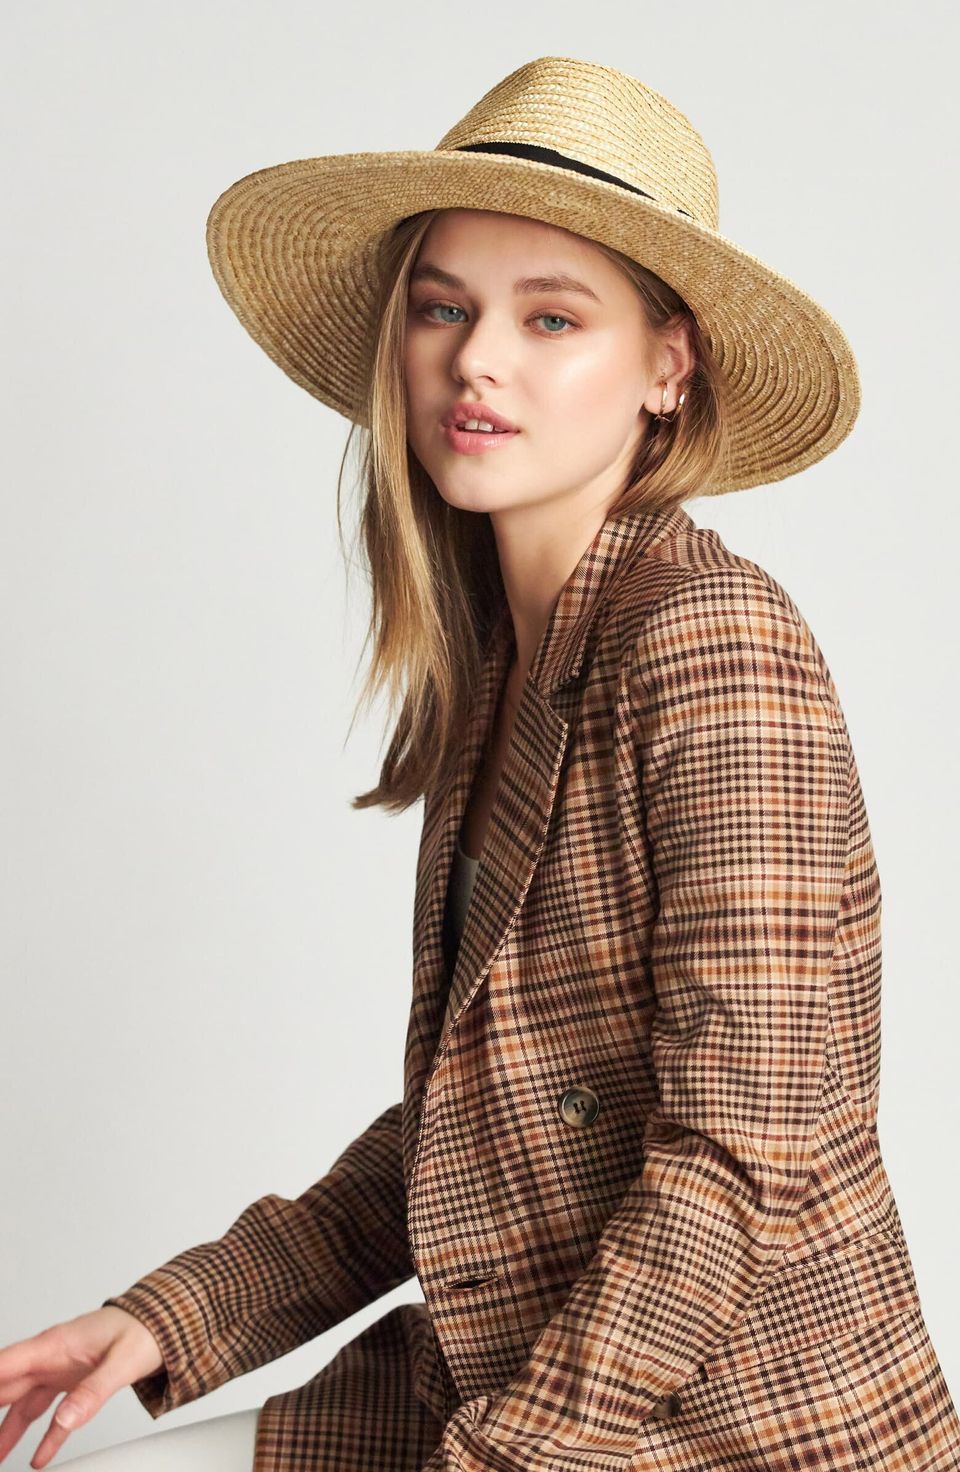 A straw hat to keep the sun at bay 